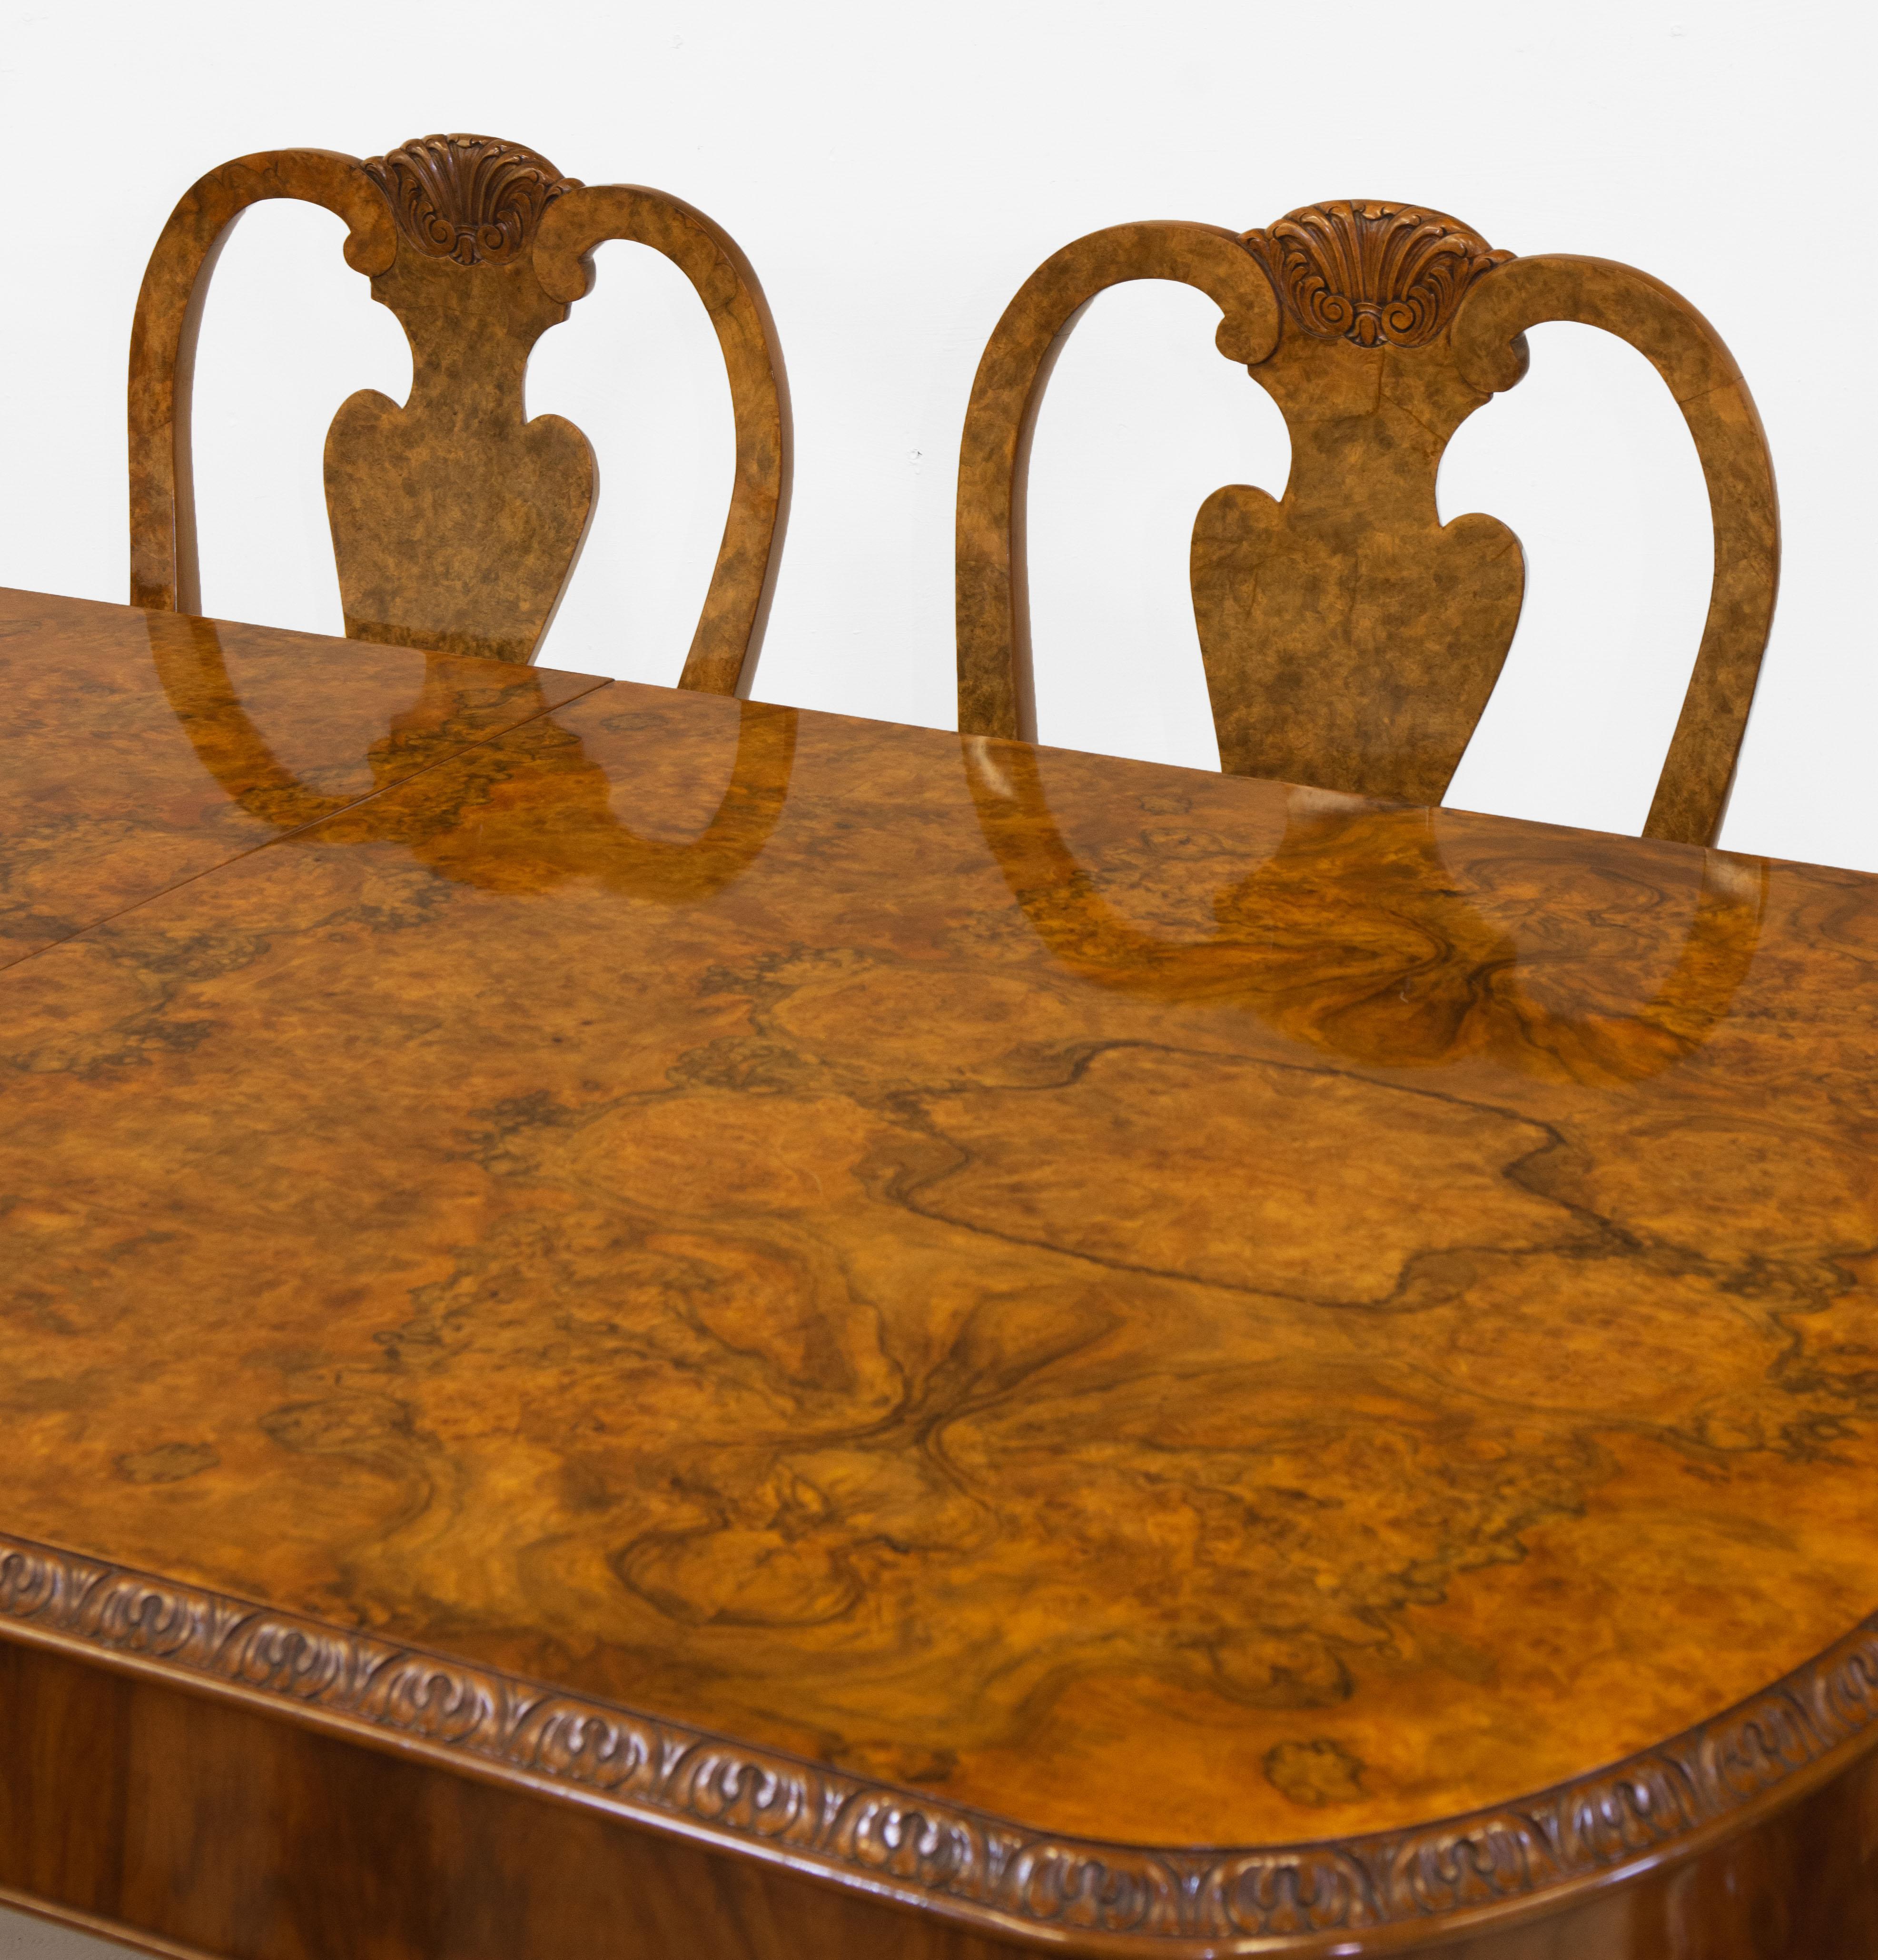 Hand-Carved English Antique Burr Walnut Queen Anne Style Dining Table and Six Chairs 1930s